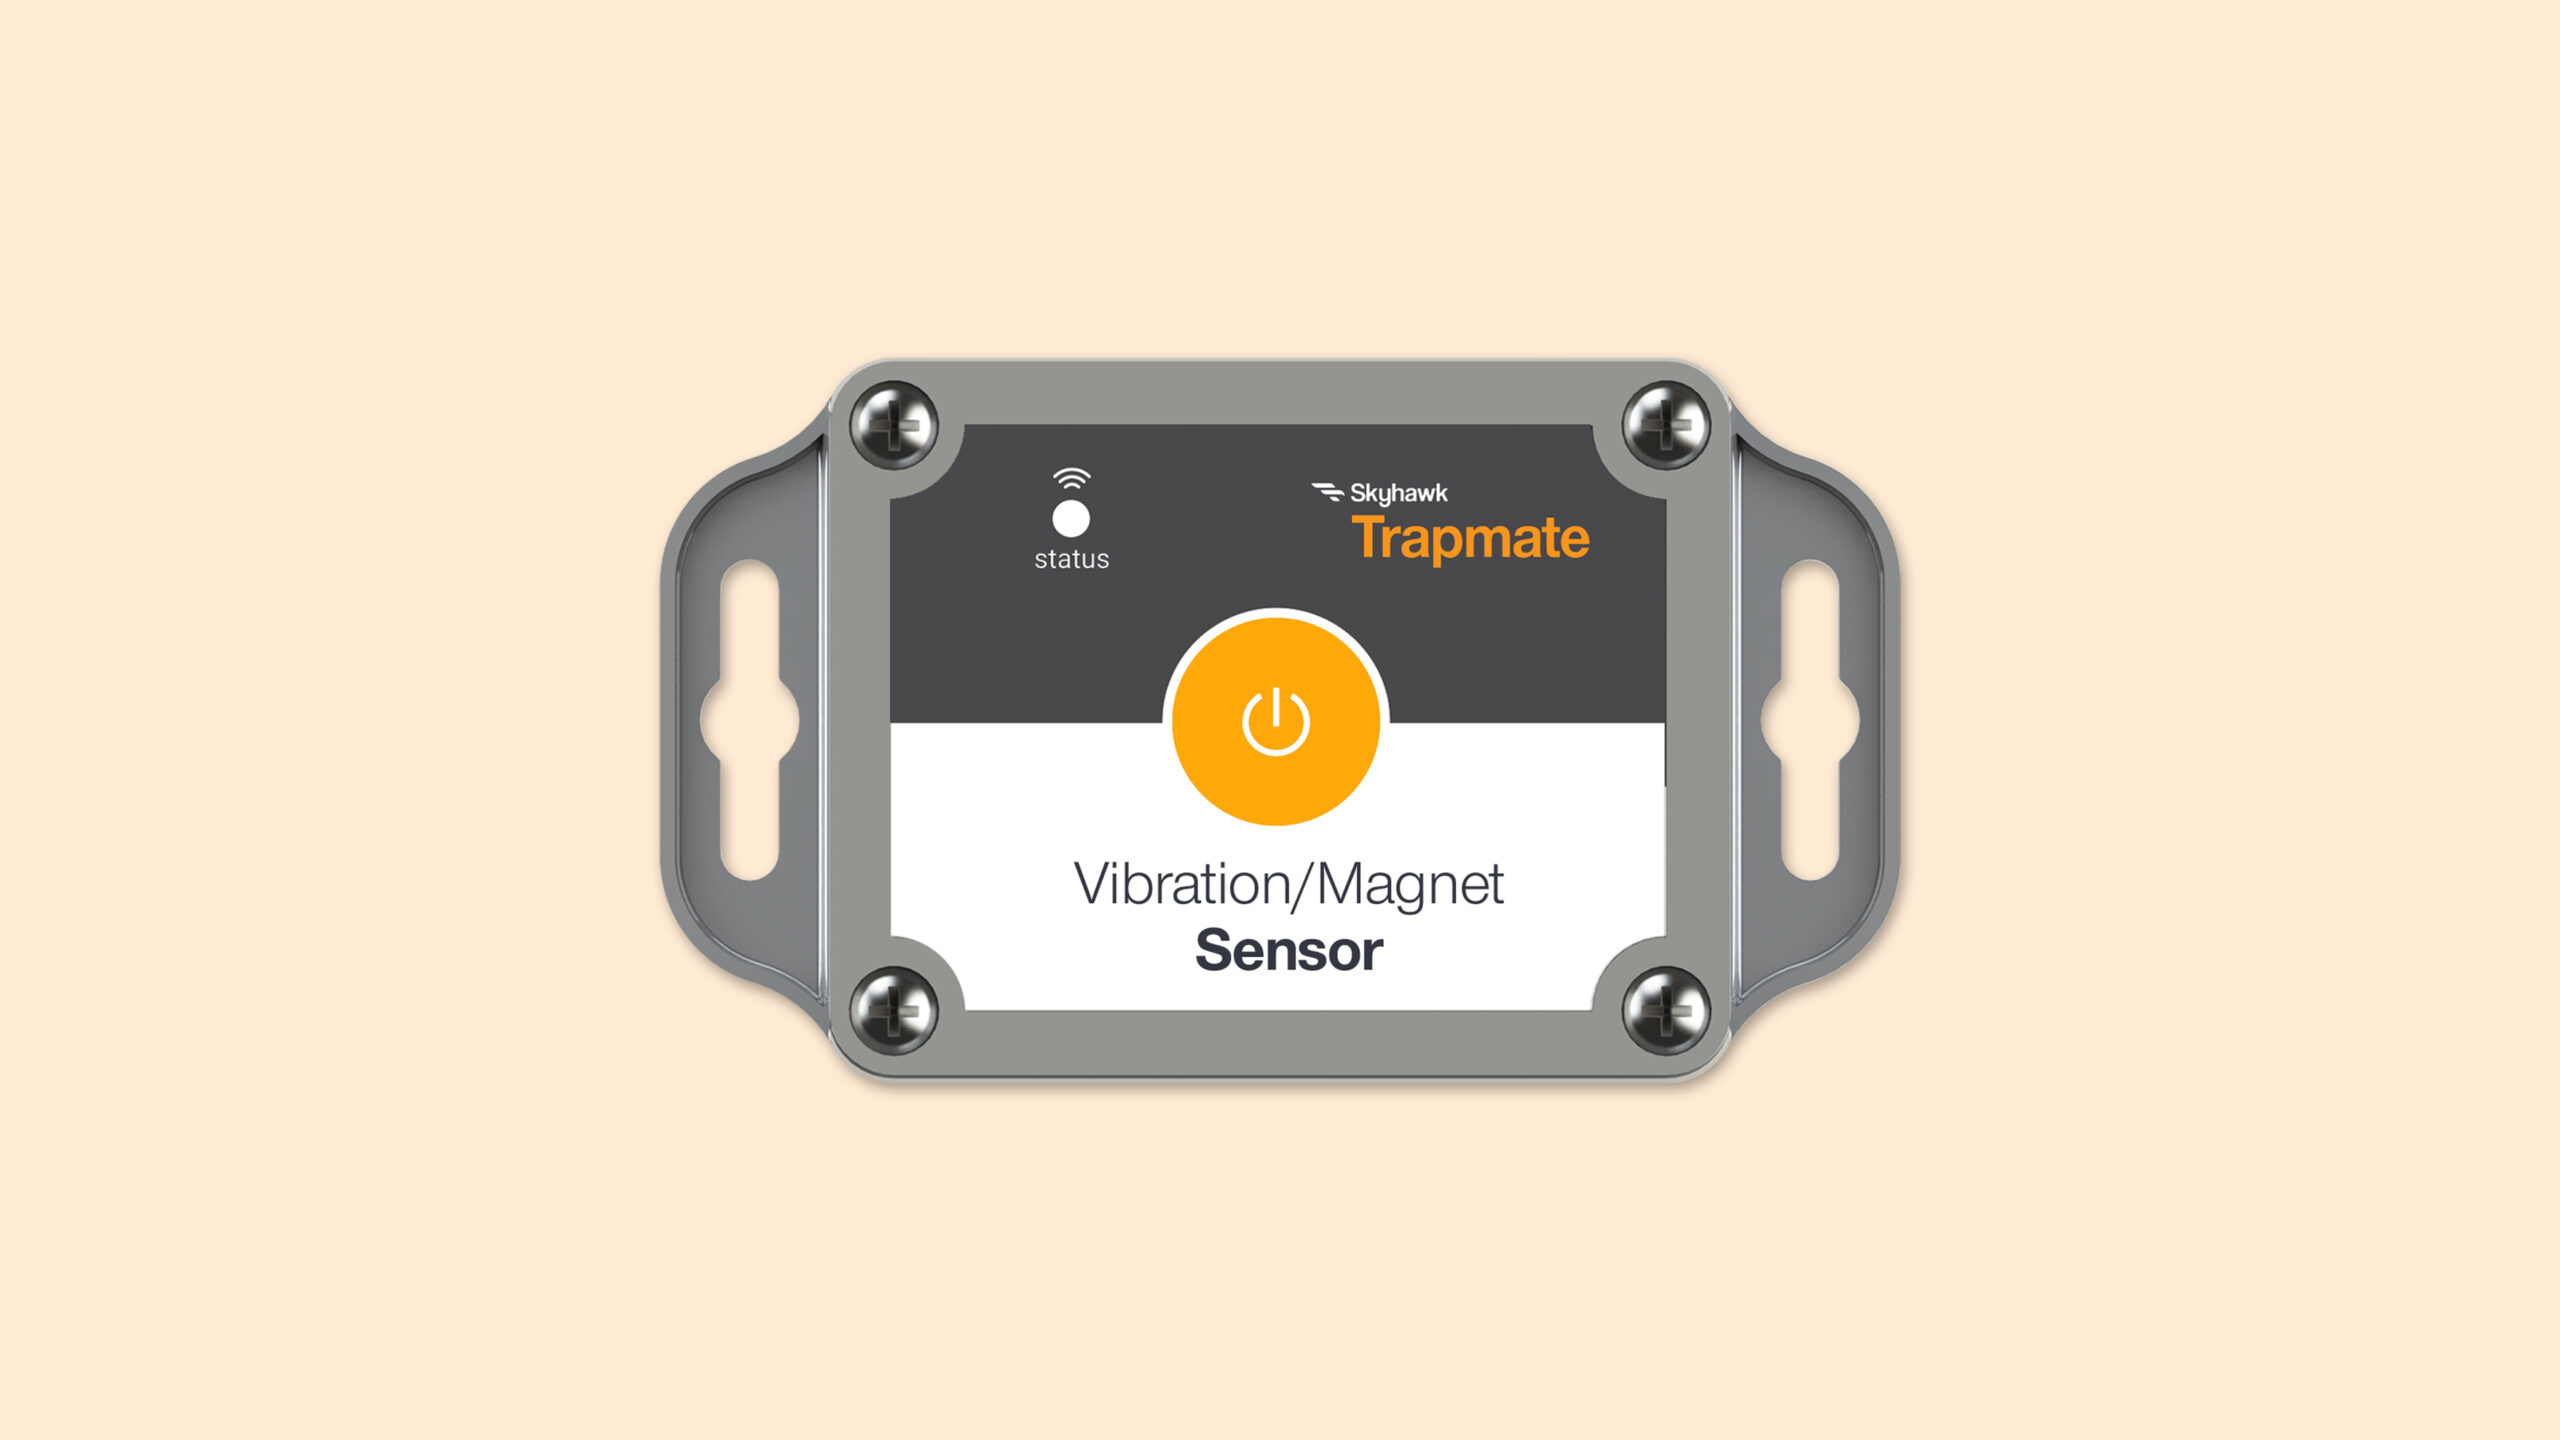 The Trapmate Vibration/Magnet Sensor combines two sensor types for the highest reliablilty in trap monitoring